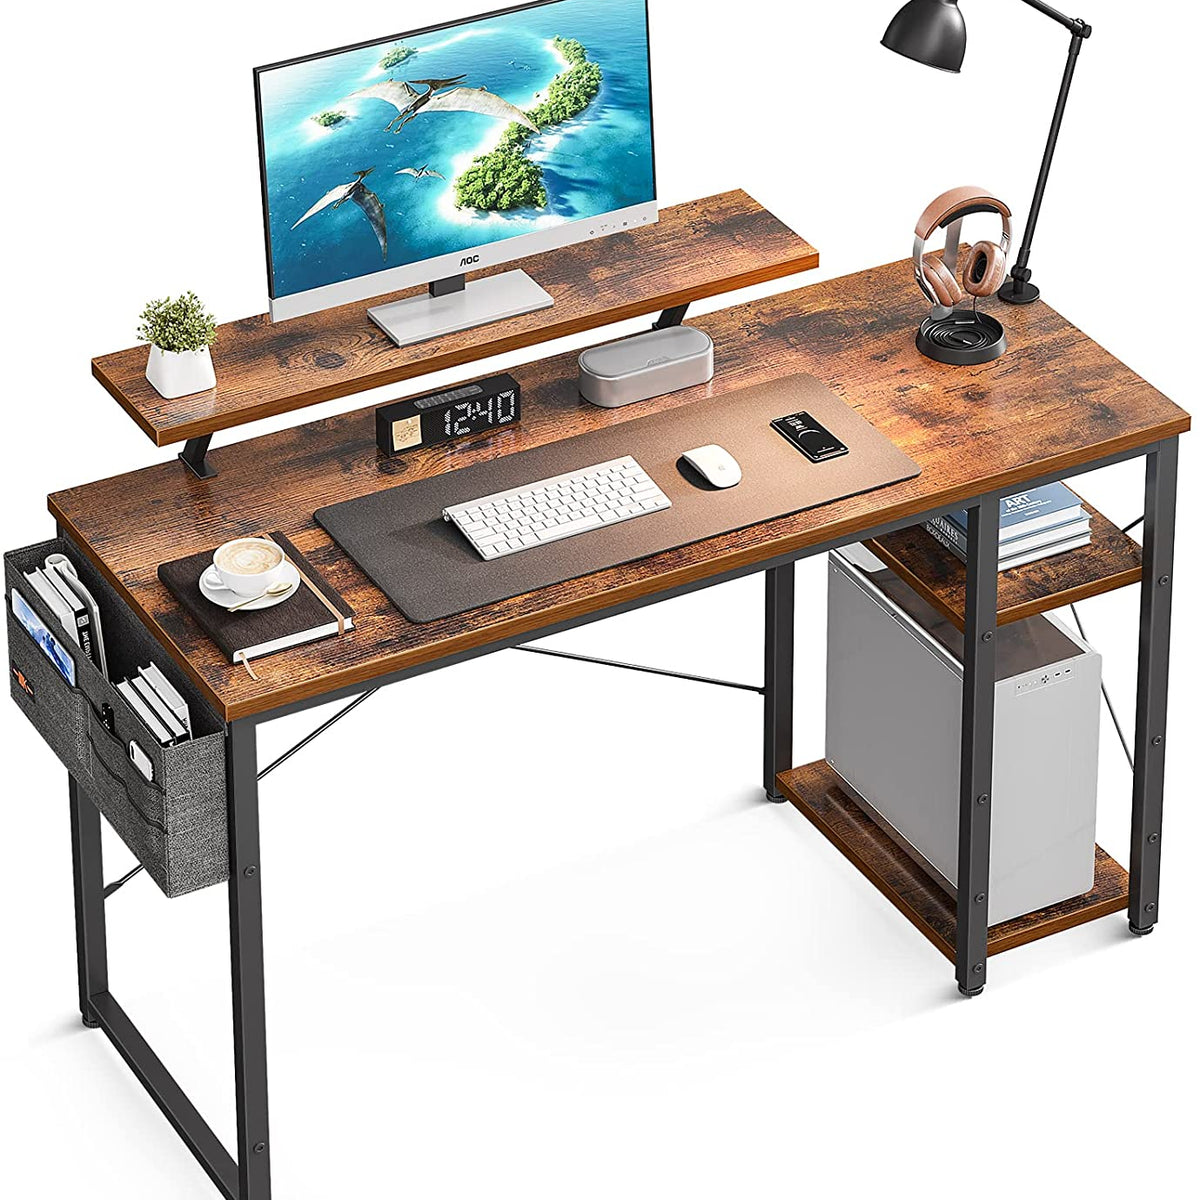 ODK Computer Desk with Adjustable Monitor Shelves, 55 inch Home Office Desk  with Monitor Stand, Writing Desk, Study Workstation with 3 Heights (10cm,  13cm, 16cm…